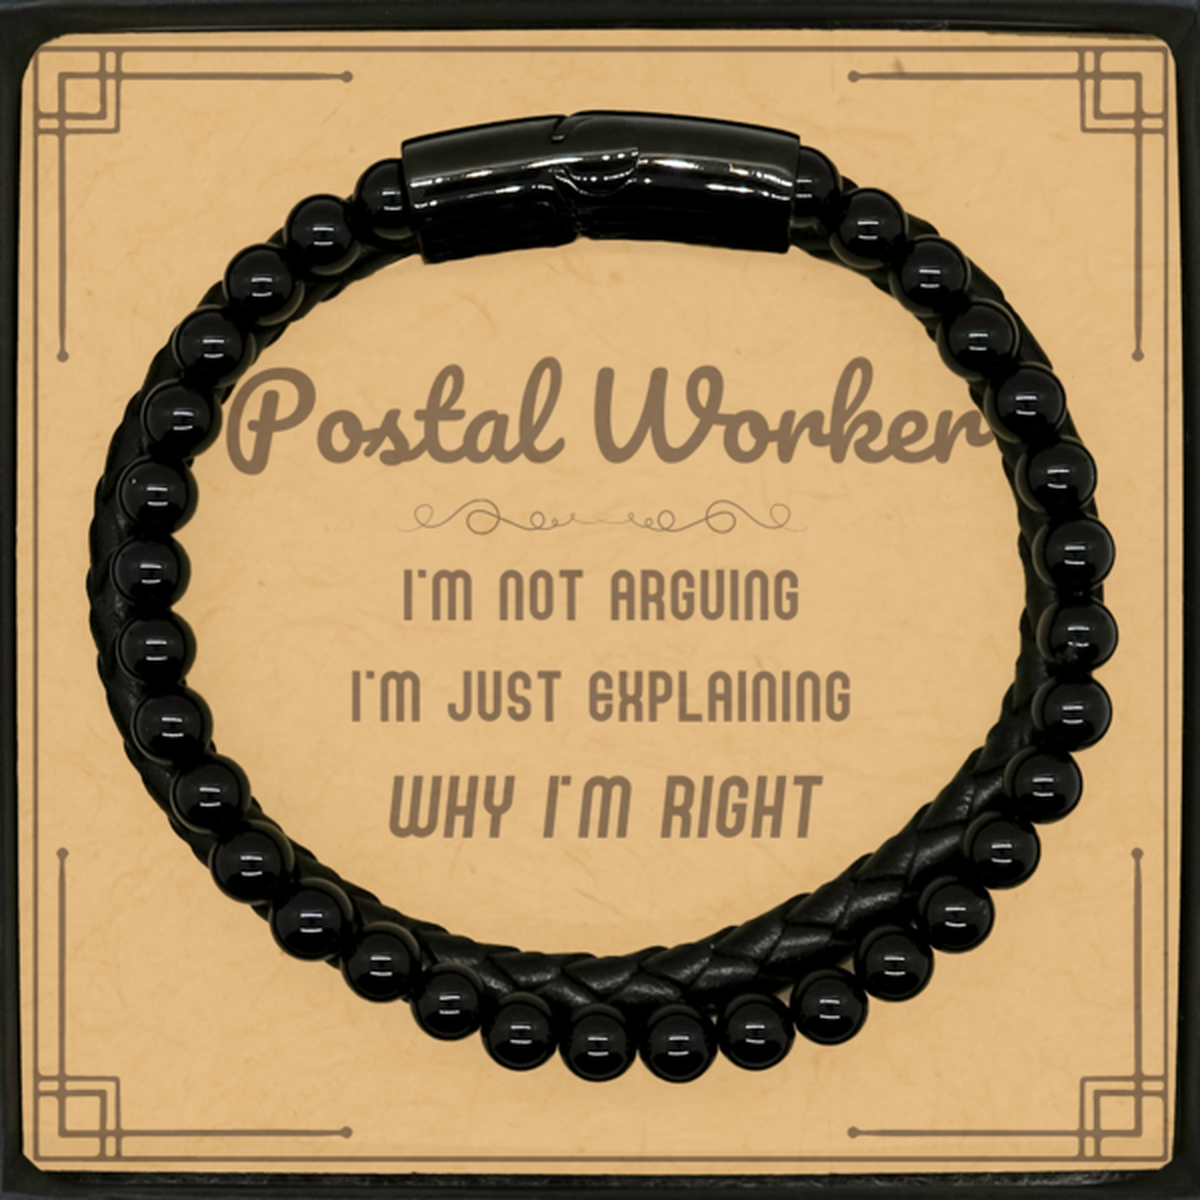 Postal Worker I'm not Arguing. I'm Just Explaining Why I'm RIGHT Stone Leather Bracelets, Funny Saying Quote Postal Worker Gifts For Postal Worker Message Card Graduation Birthday Christmas Gifts for Men Women Coworker